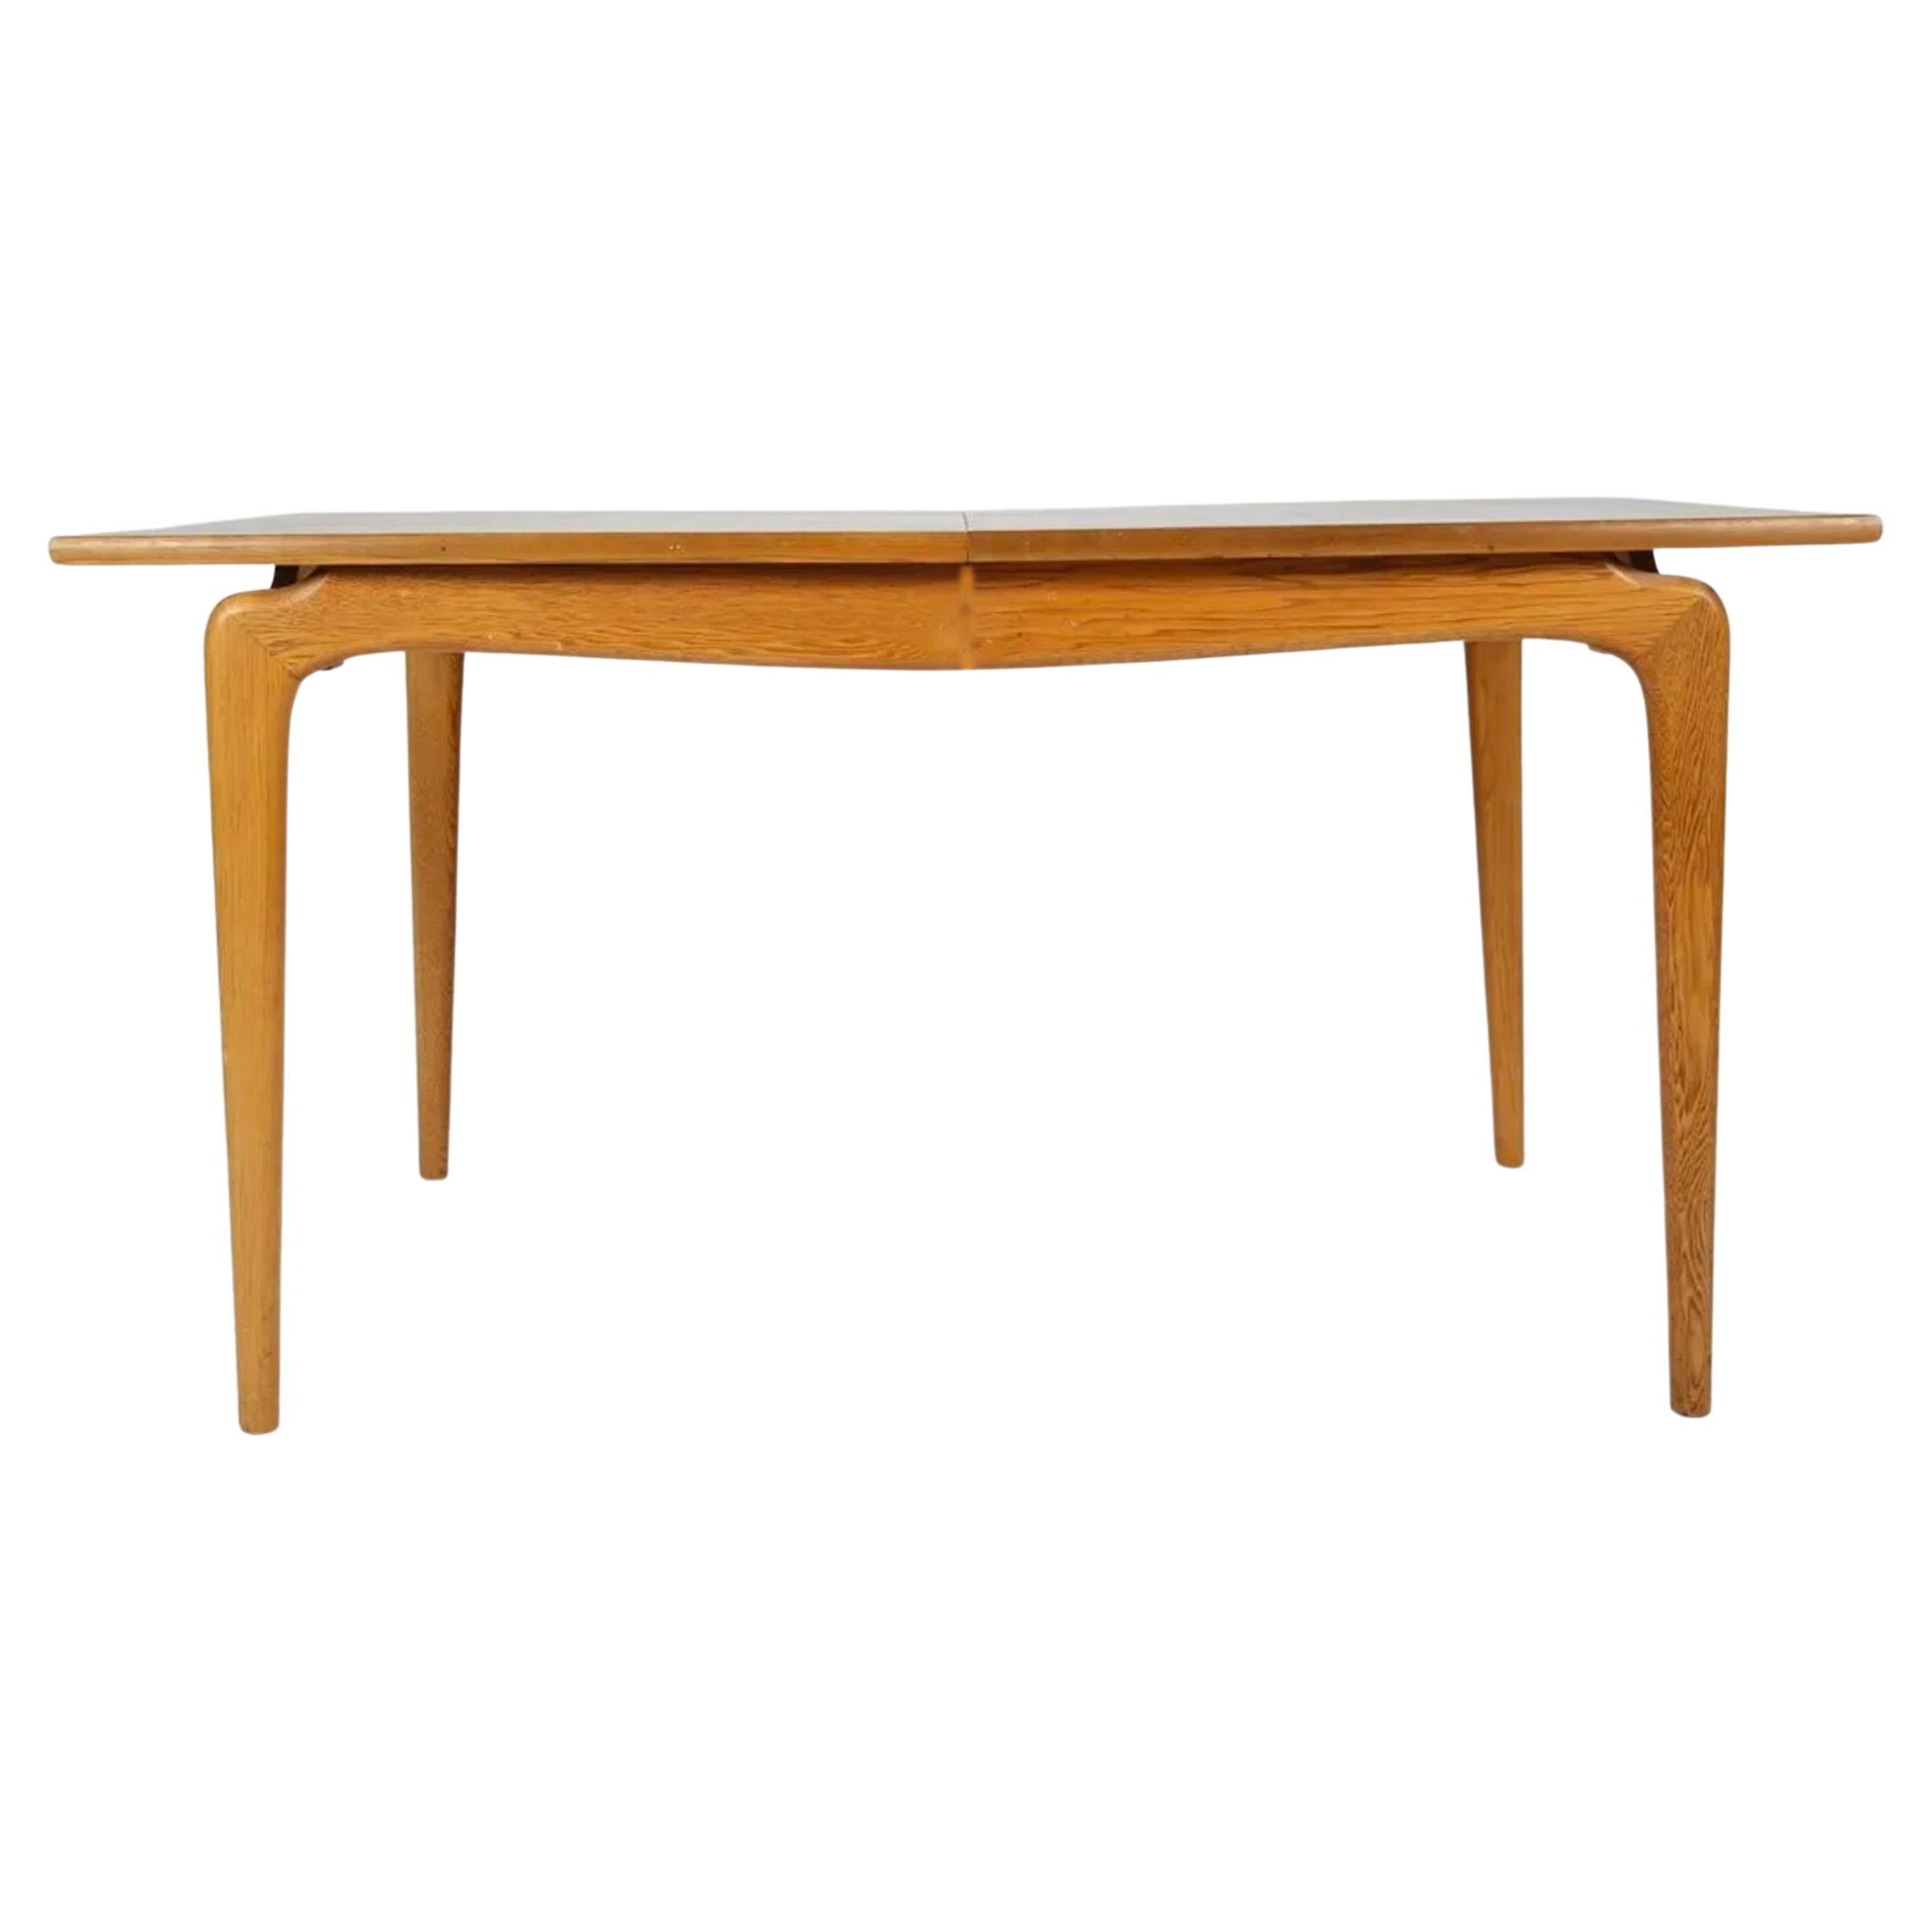 Mid Century Modern Lane Furniture Perception Group extension dining table Oak & Walnut 1963. Model: 57.  Walnut dining table from the Perception Group by Lane Furniture. Designed by Warren Church. Lower Sculpted legs are made of solid lighter Oak